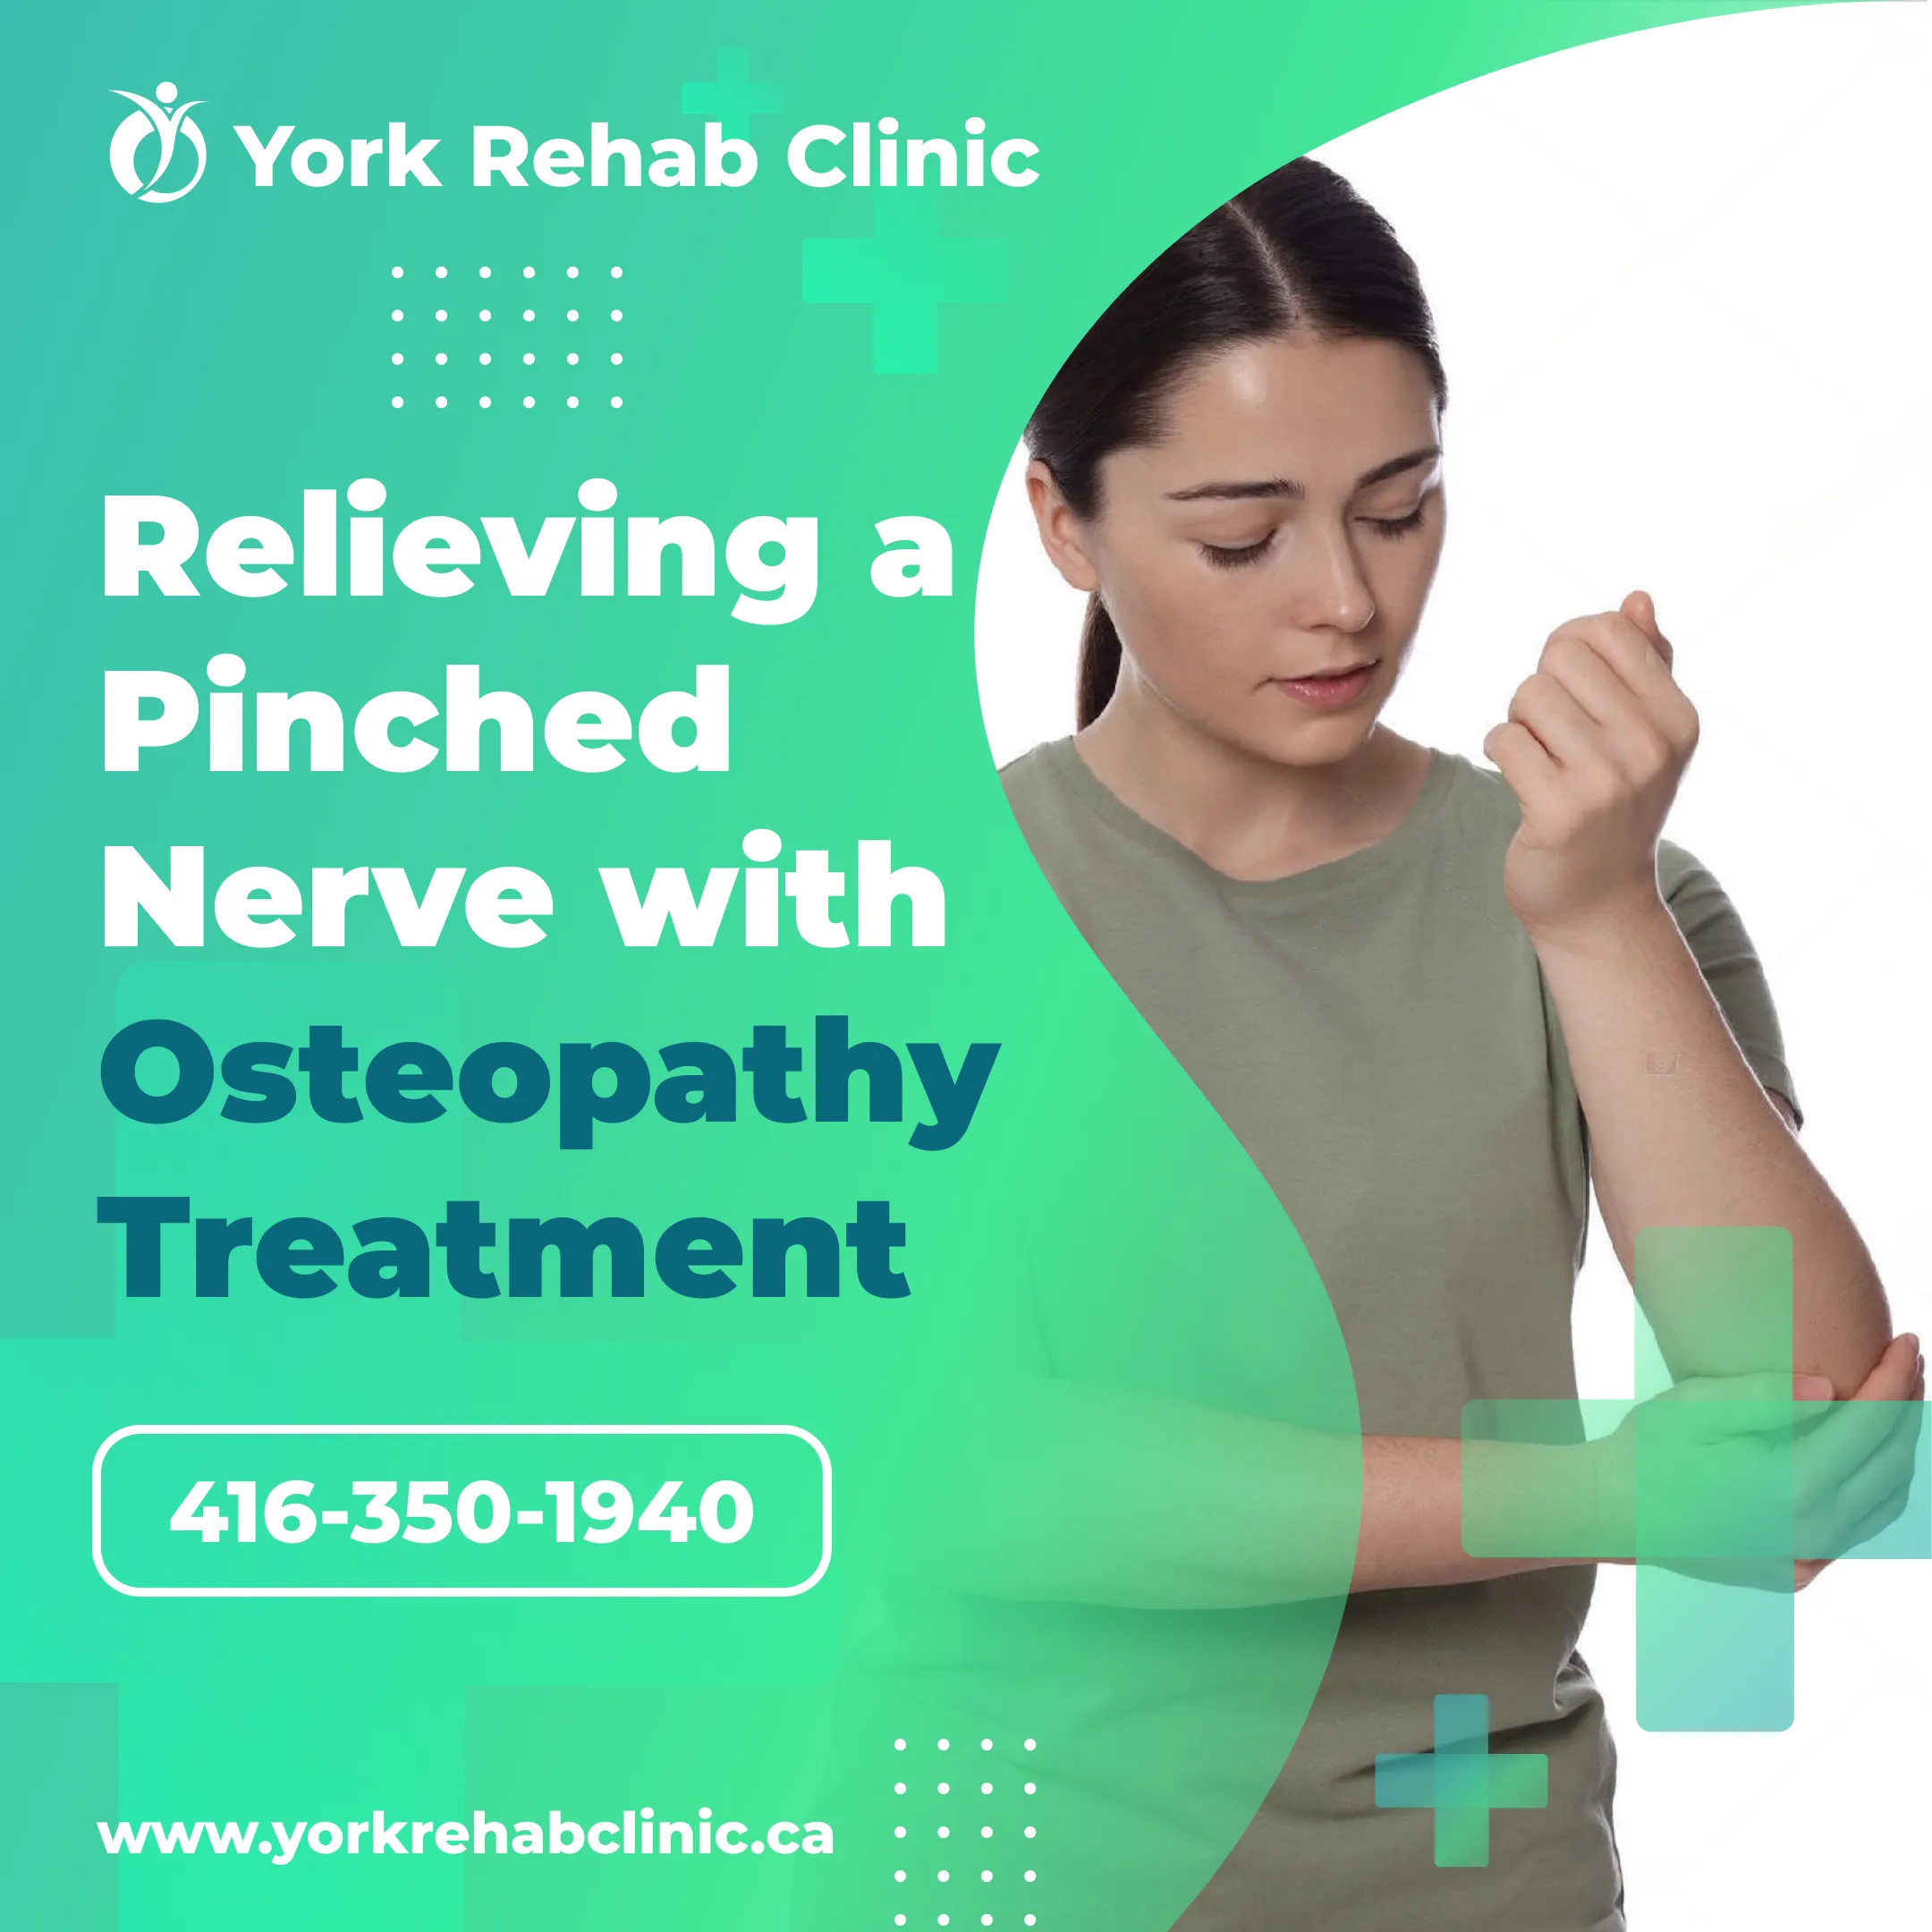 Relieve Pain and Discomfort with Osteopathy Treatment for Pinched Nerve